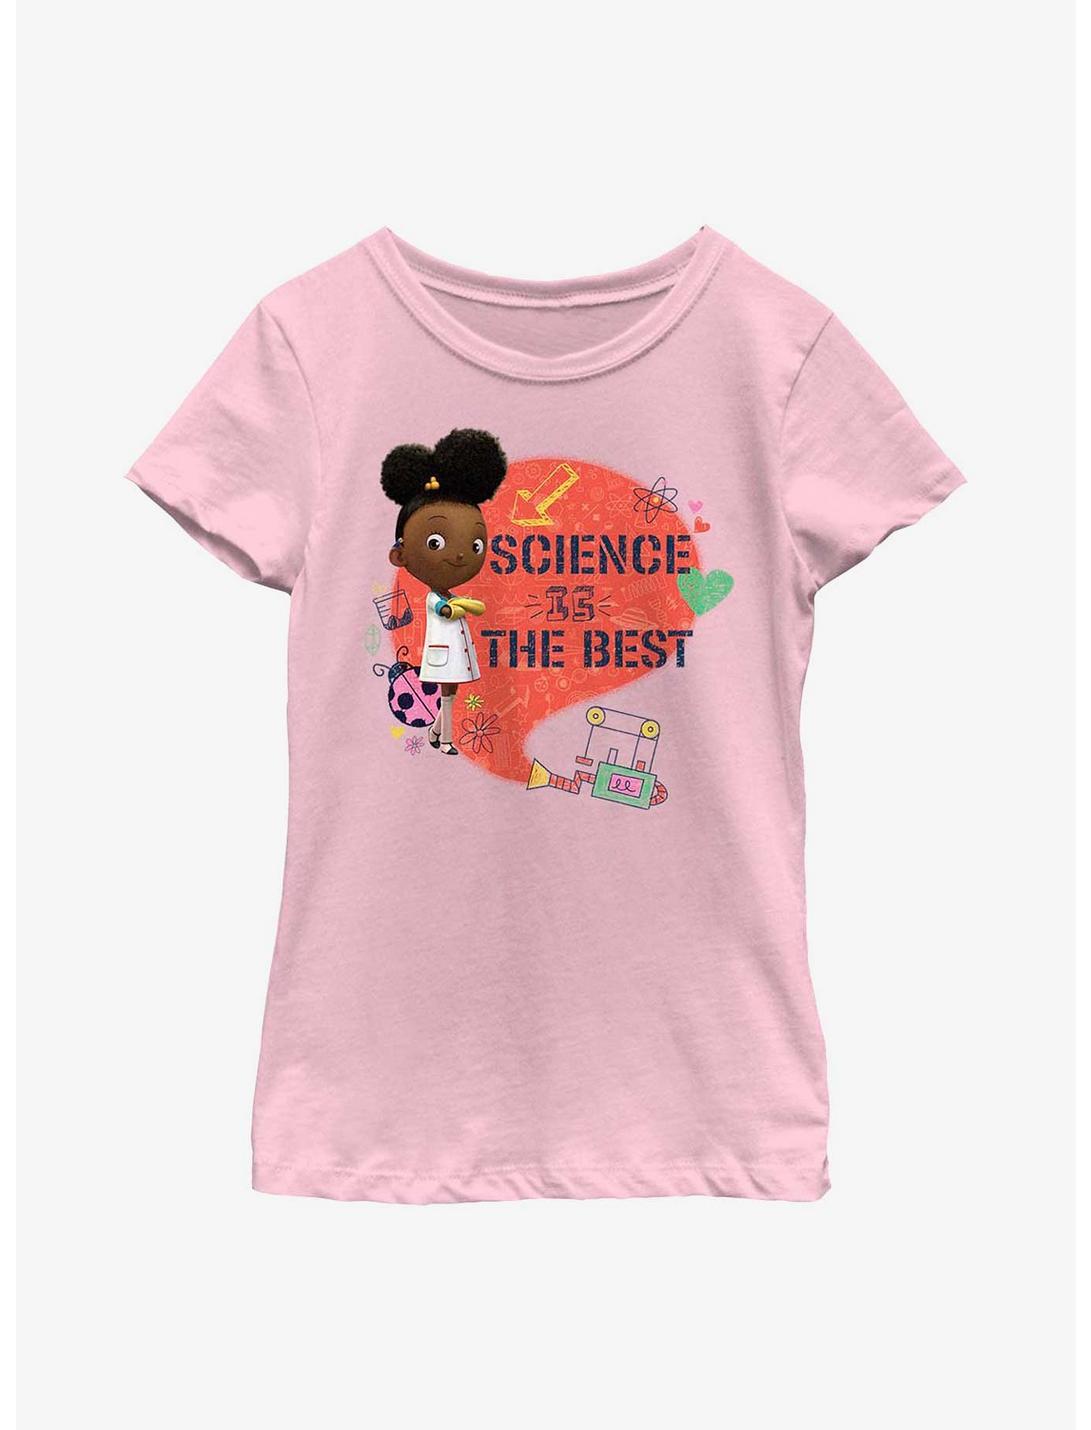 Ada Twist, Scientist Science Doodle Youth Girls T-Shirt, PINK, hi-res